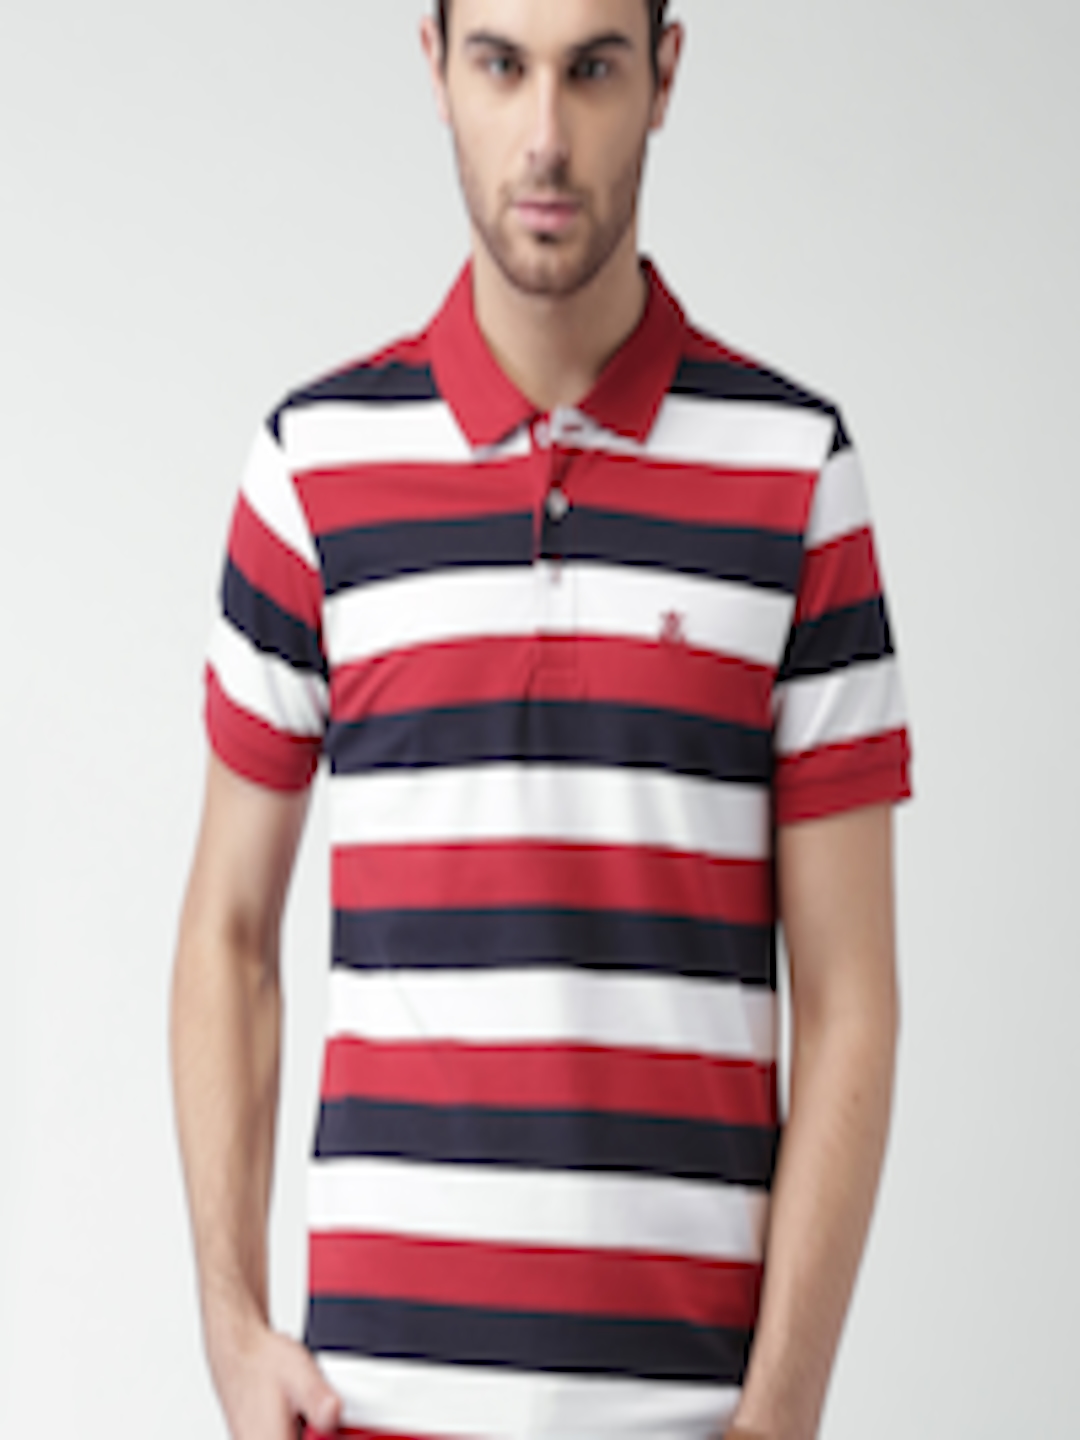 Buy SELECTED Red & White Striped Polo T Shirt - Tshirts for Men 1373545 ...